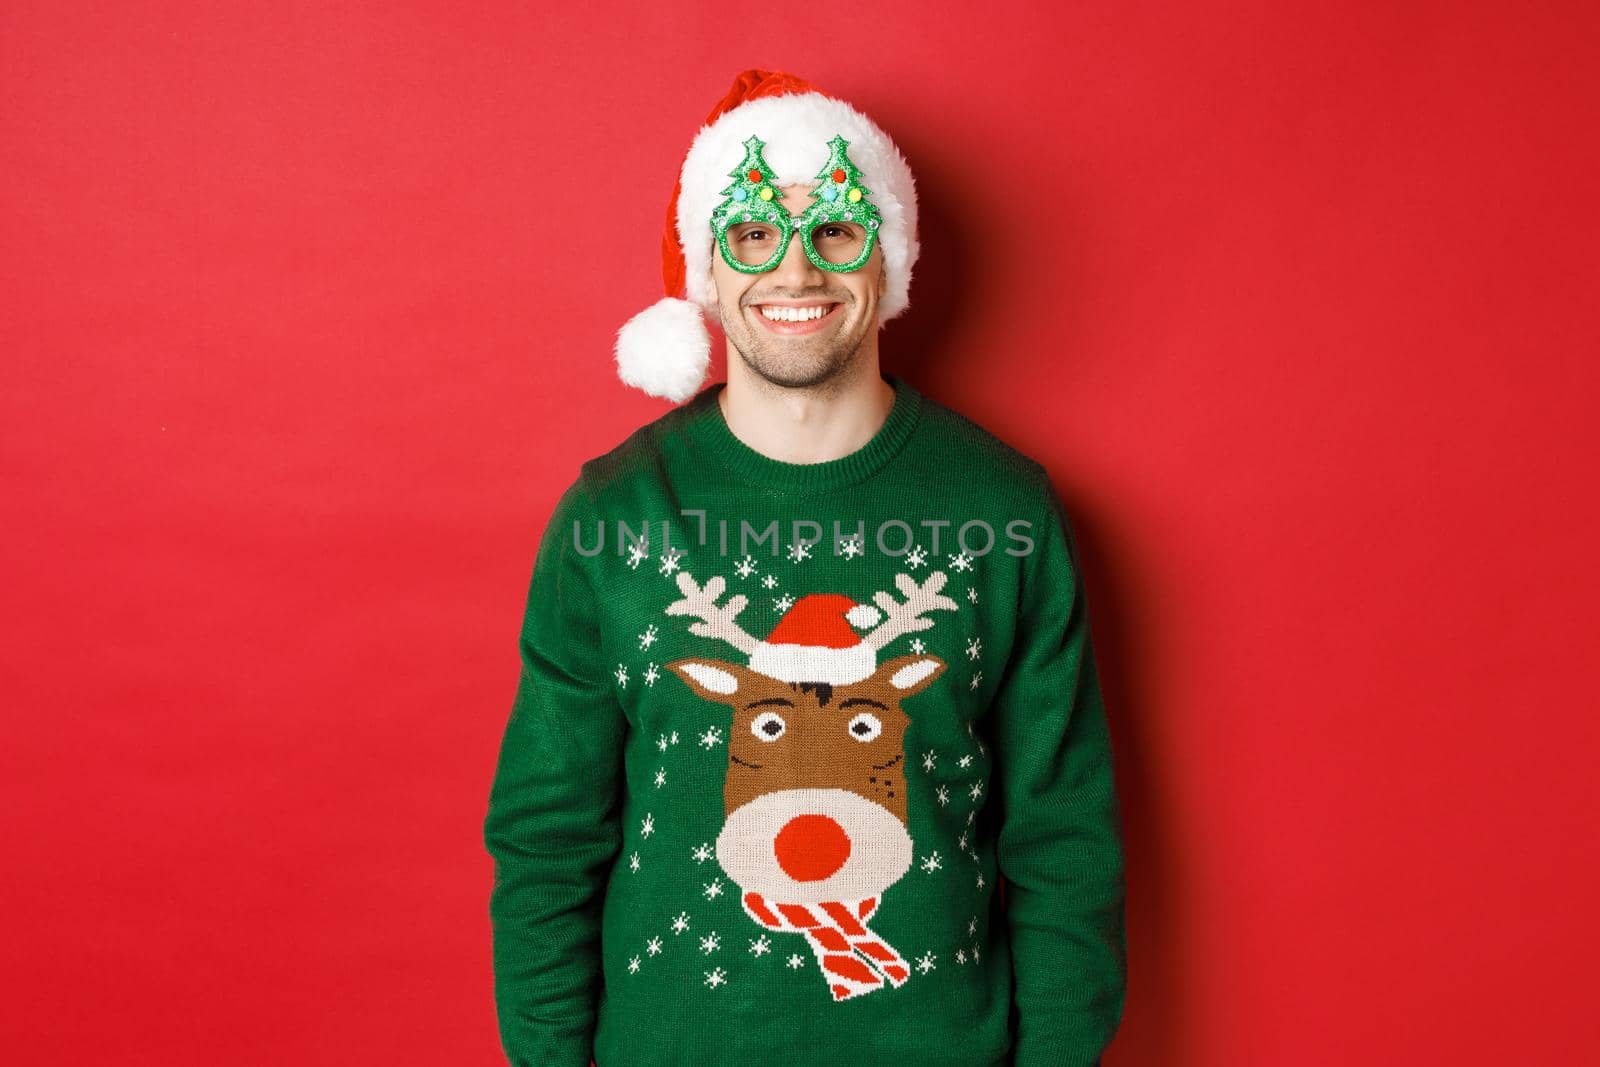 Portrait of handsome man in green christmas sweater, santa hat and party glasses, smiling happy, standing over red background.